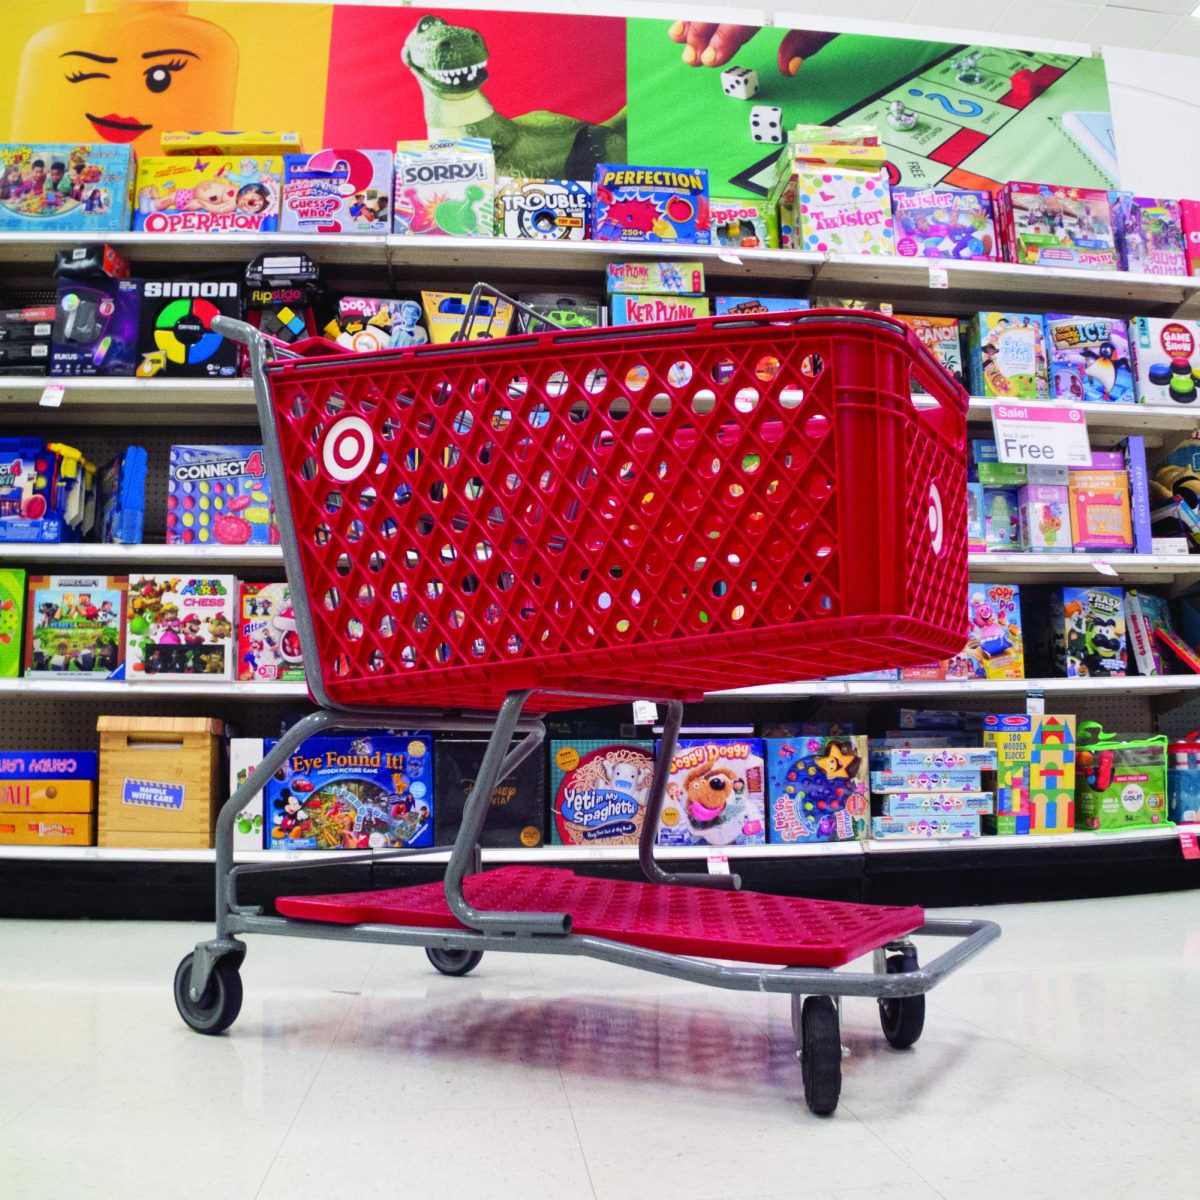 WATCHFUL+EYES+Even+with+registers+and+aisles+unattended%2C+Target+utilizes+cameras+across+the+ceiling+to+keep+track+over+shoppers.+